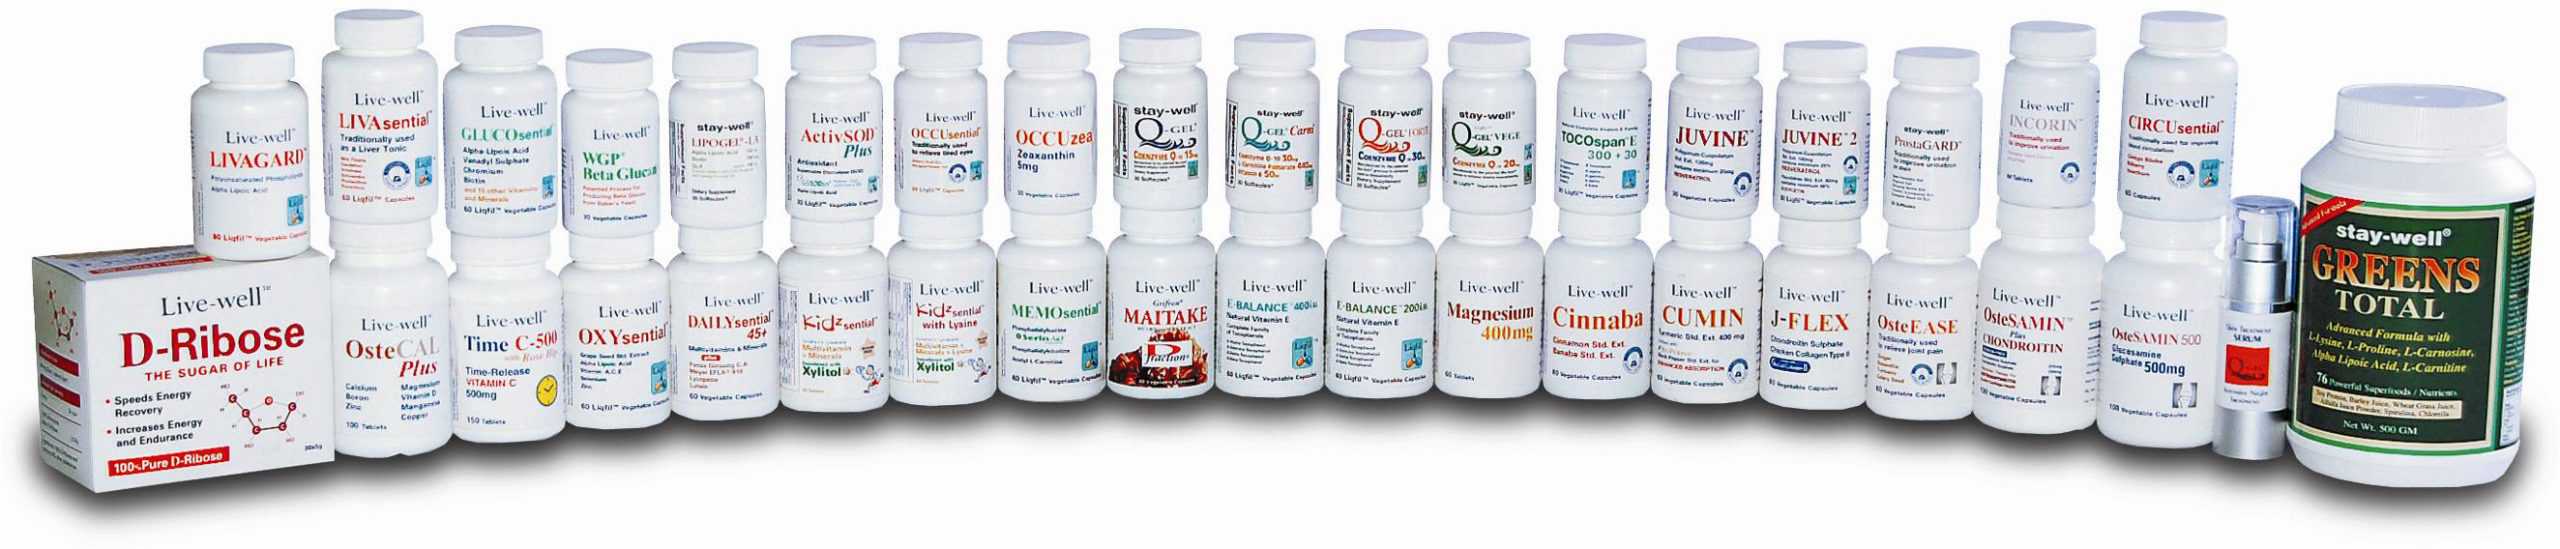 livewell health product for eye, joint, brain, blood sugar and etc